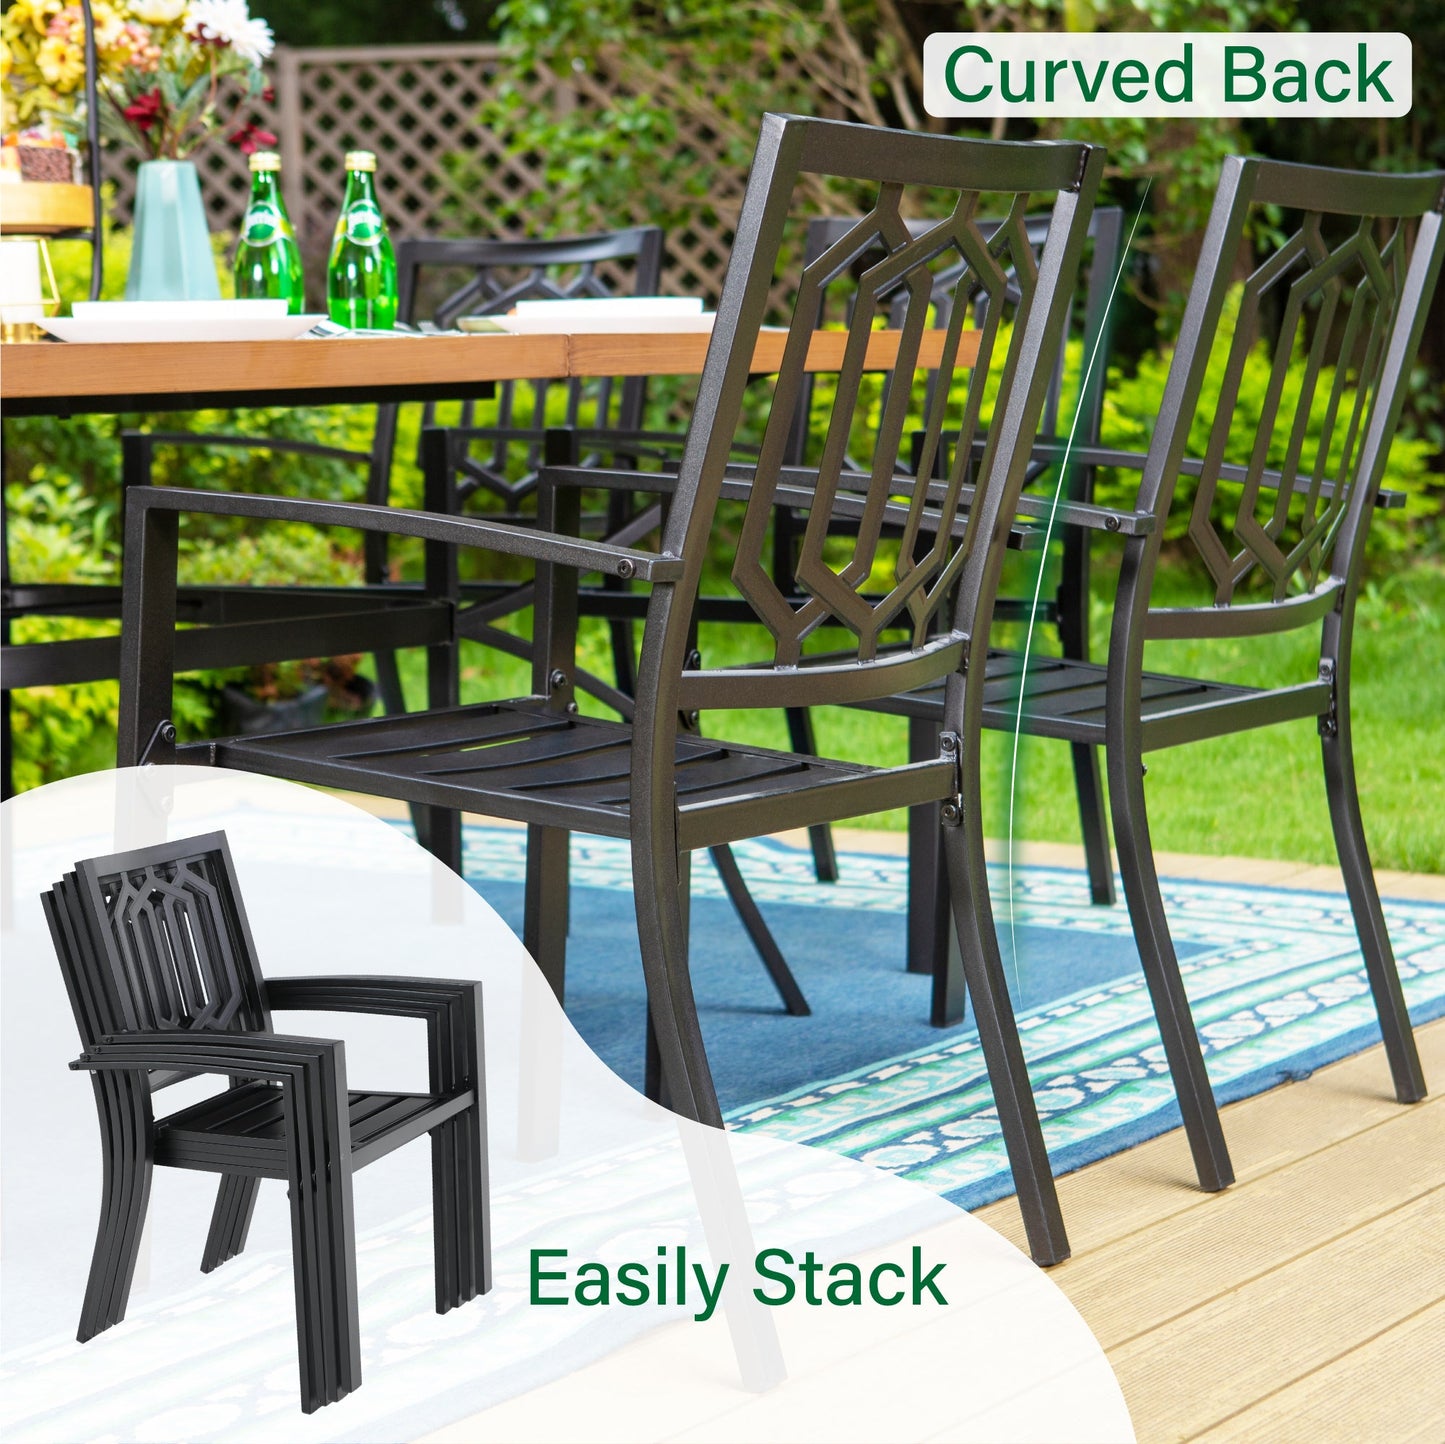 Sophia & William 5 Pcs Metal Patio Dining Set Outdoor Stackable Chairs and 37 Square Table, Black